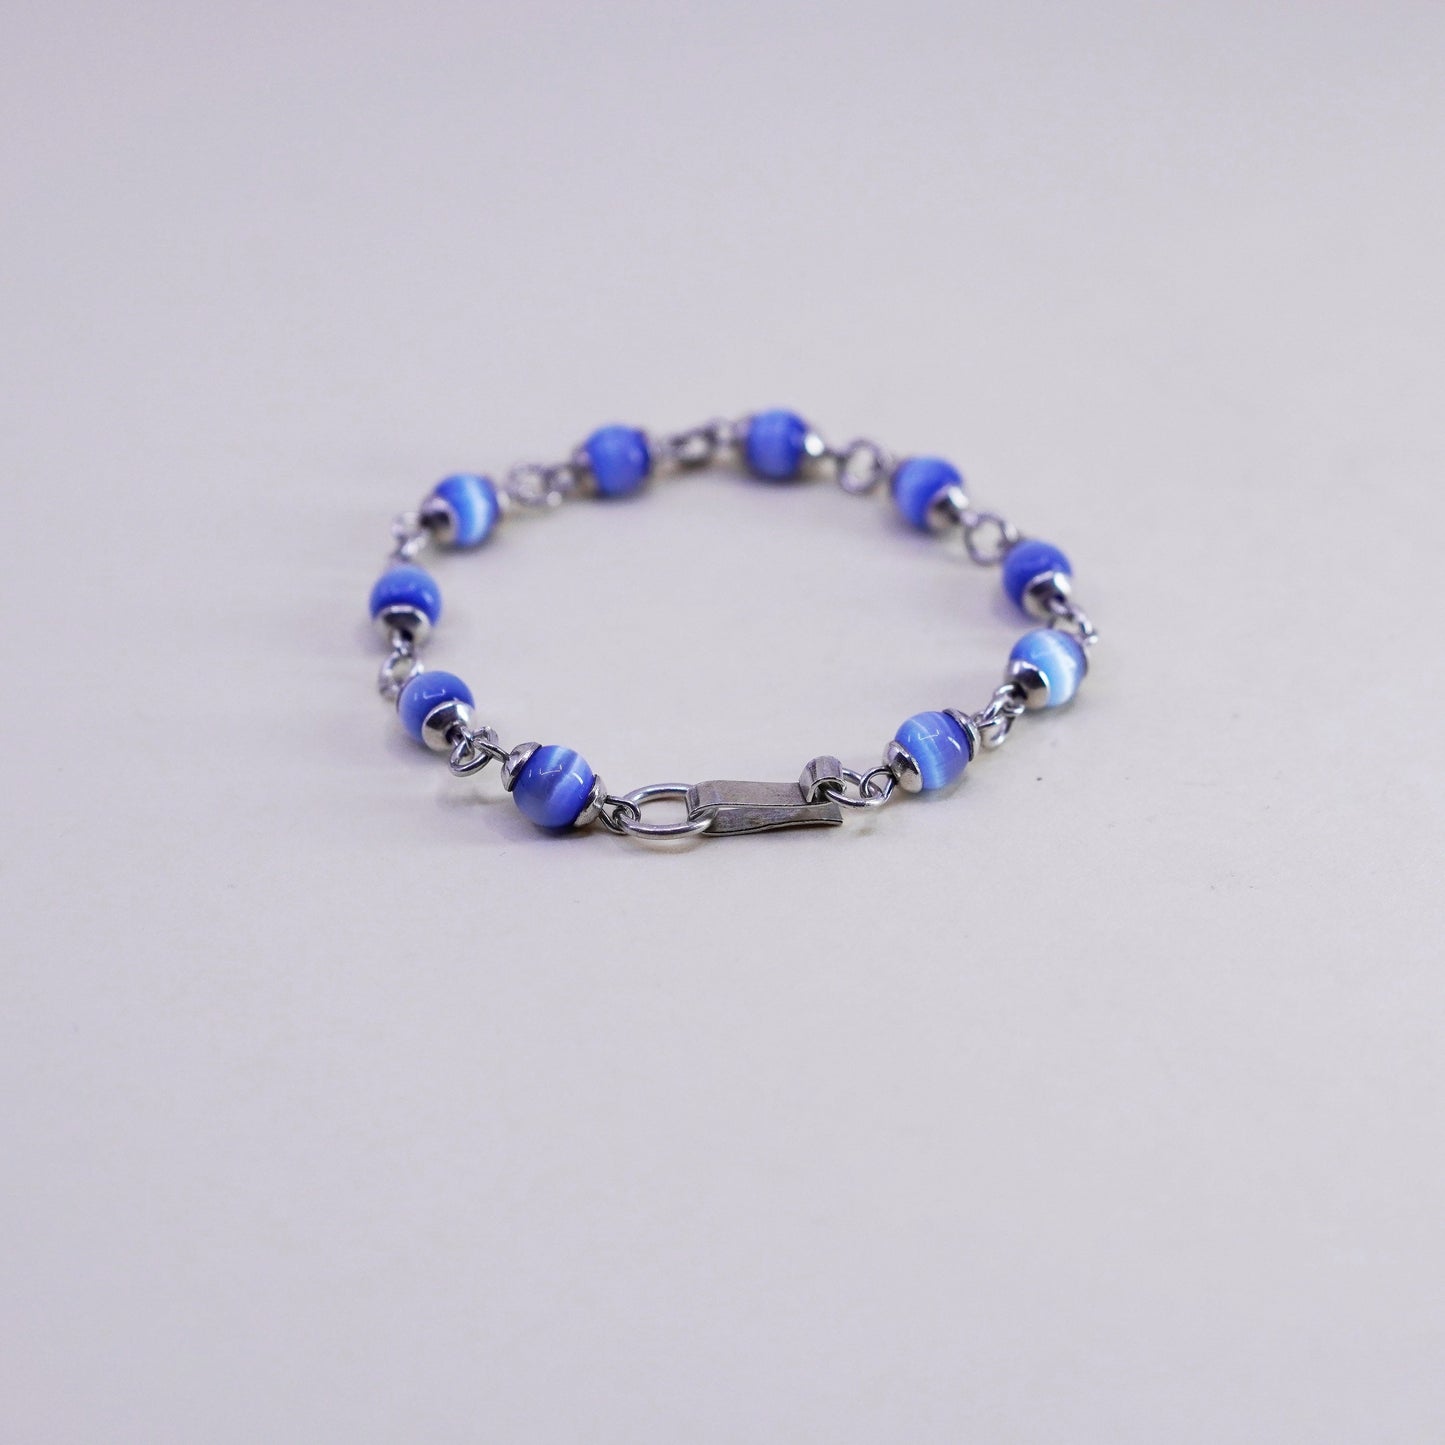 6”, Vintage Mexico sterling silver bracelet, 925 beads with blue cats eye